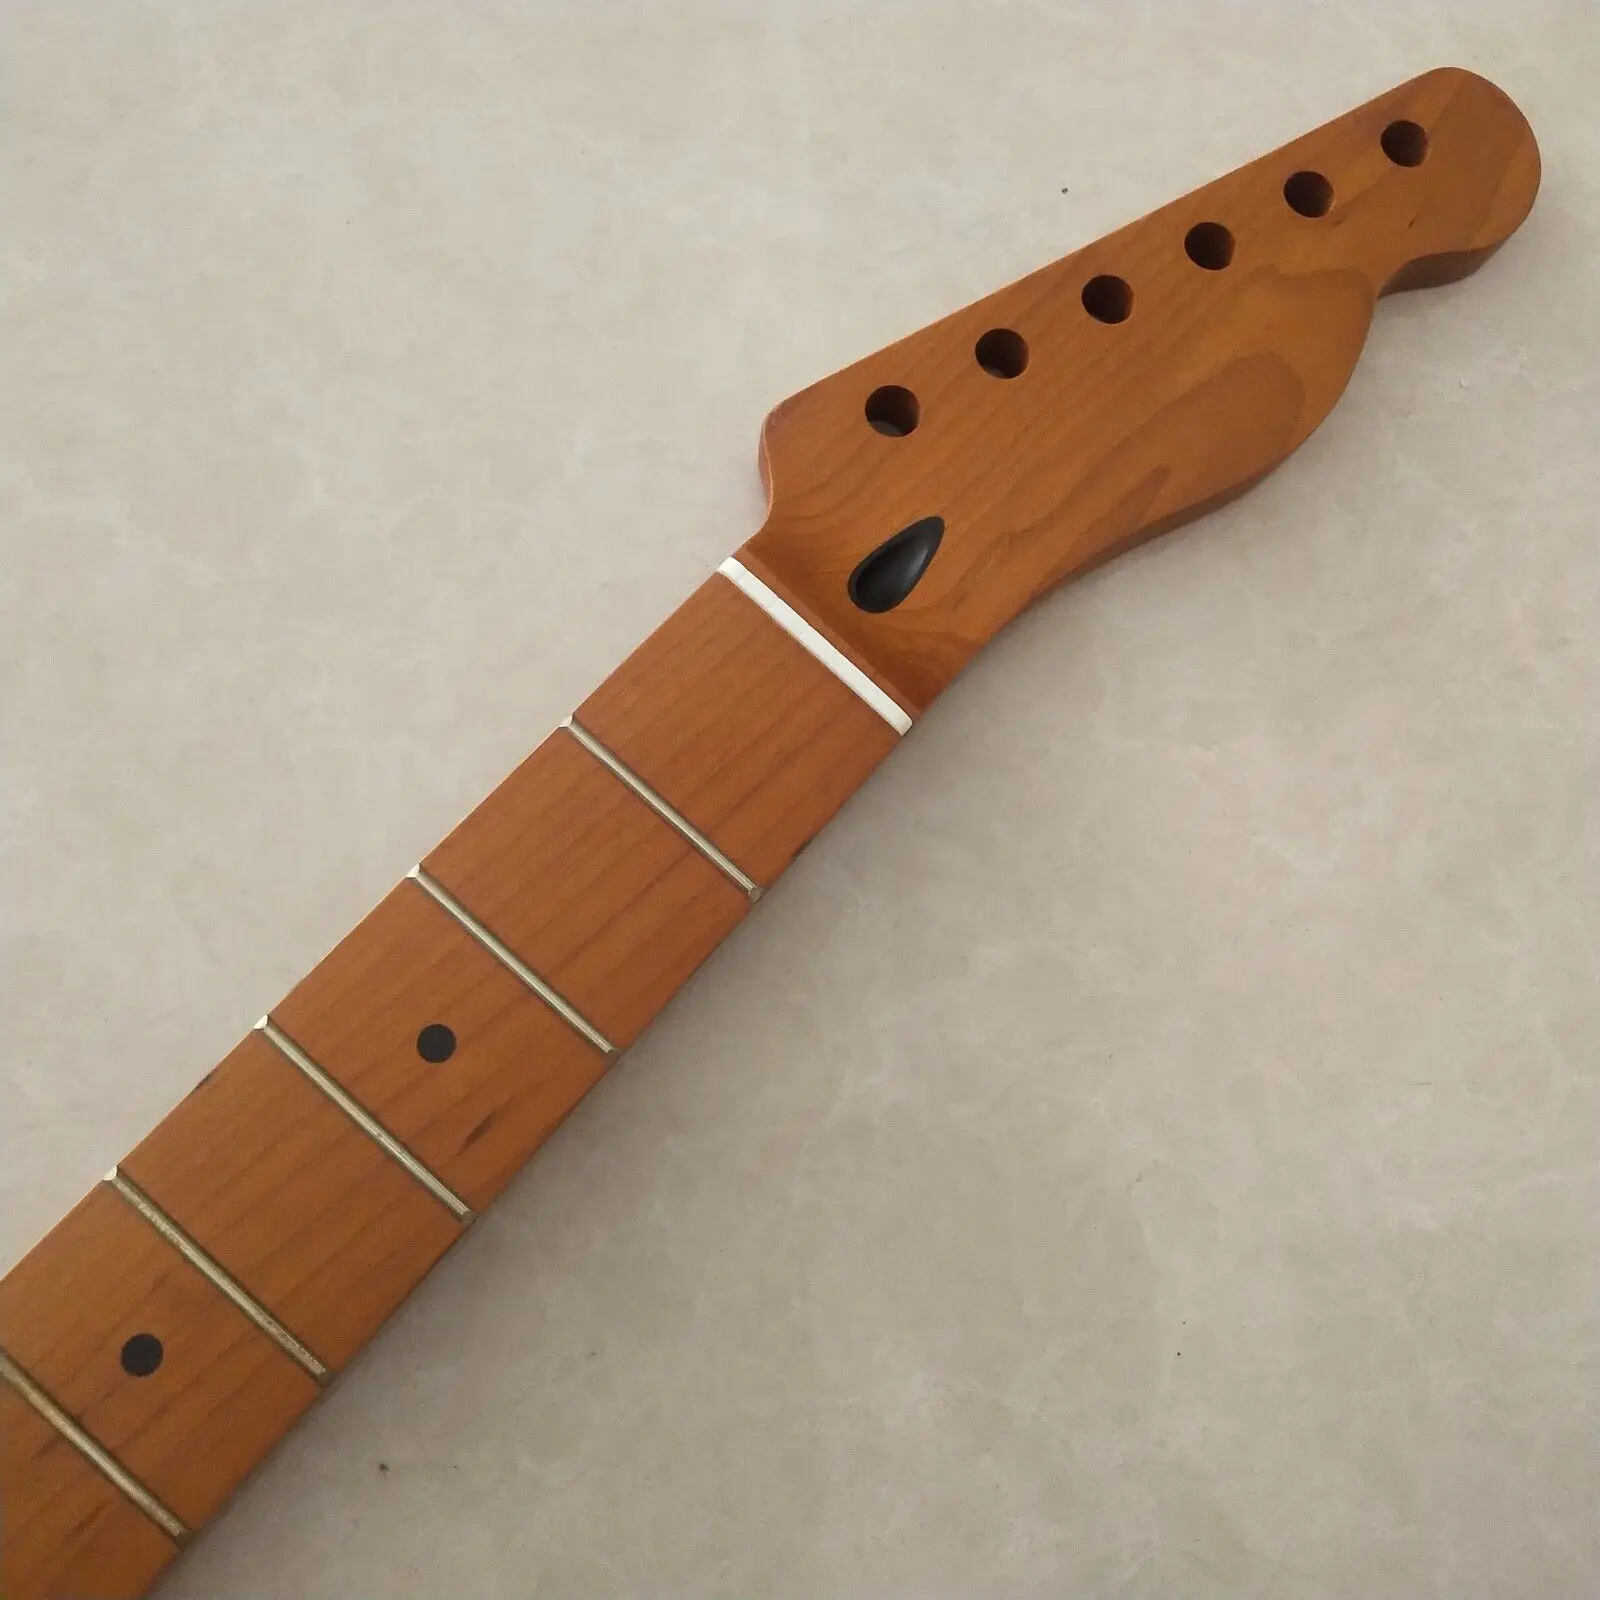 

Roasted Maple TL Guitar Neck 22 Fret 25.5 Inch Maple Fingerboard Dot Inlay parts